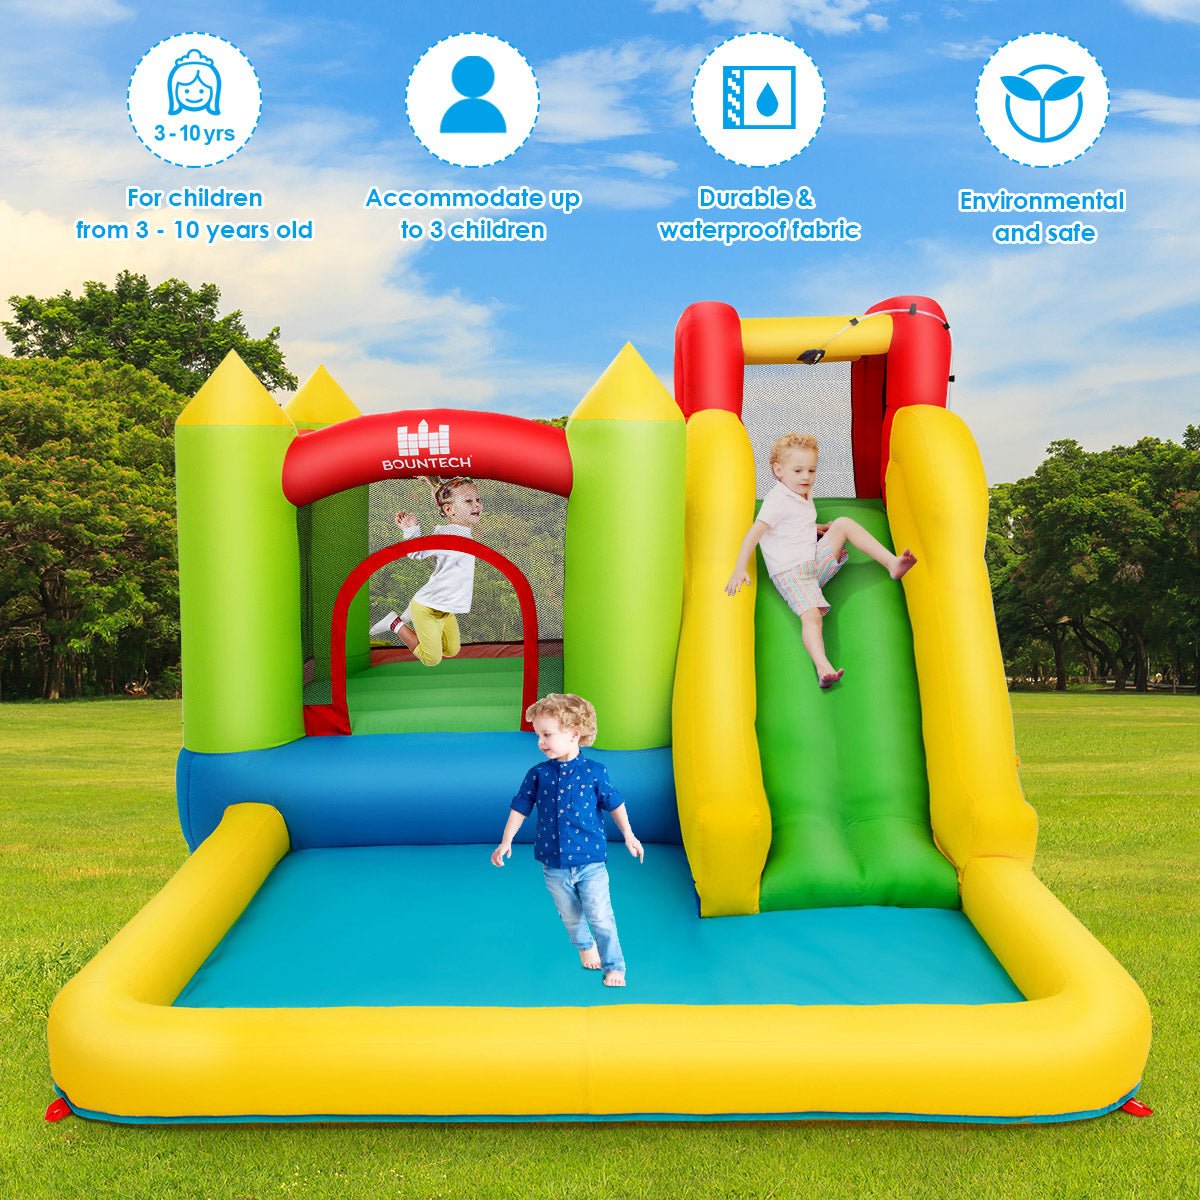 Ultimate Inflatable Castle Water Slide - Splashy Fun for Children (Blower Included)